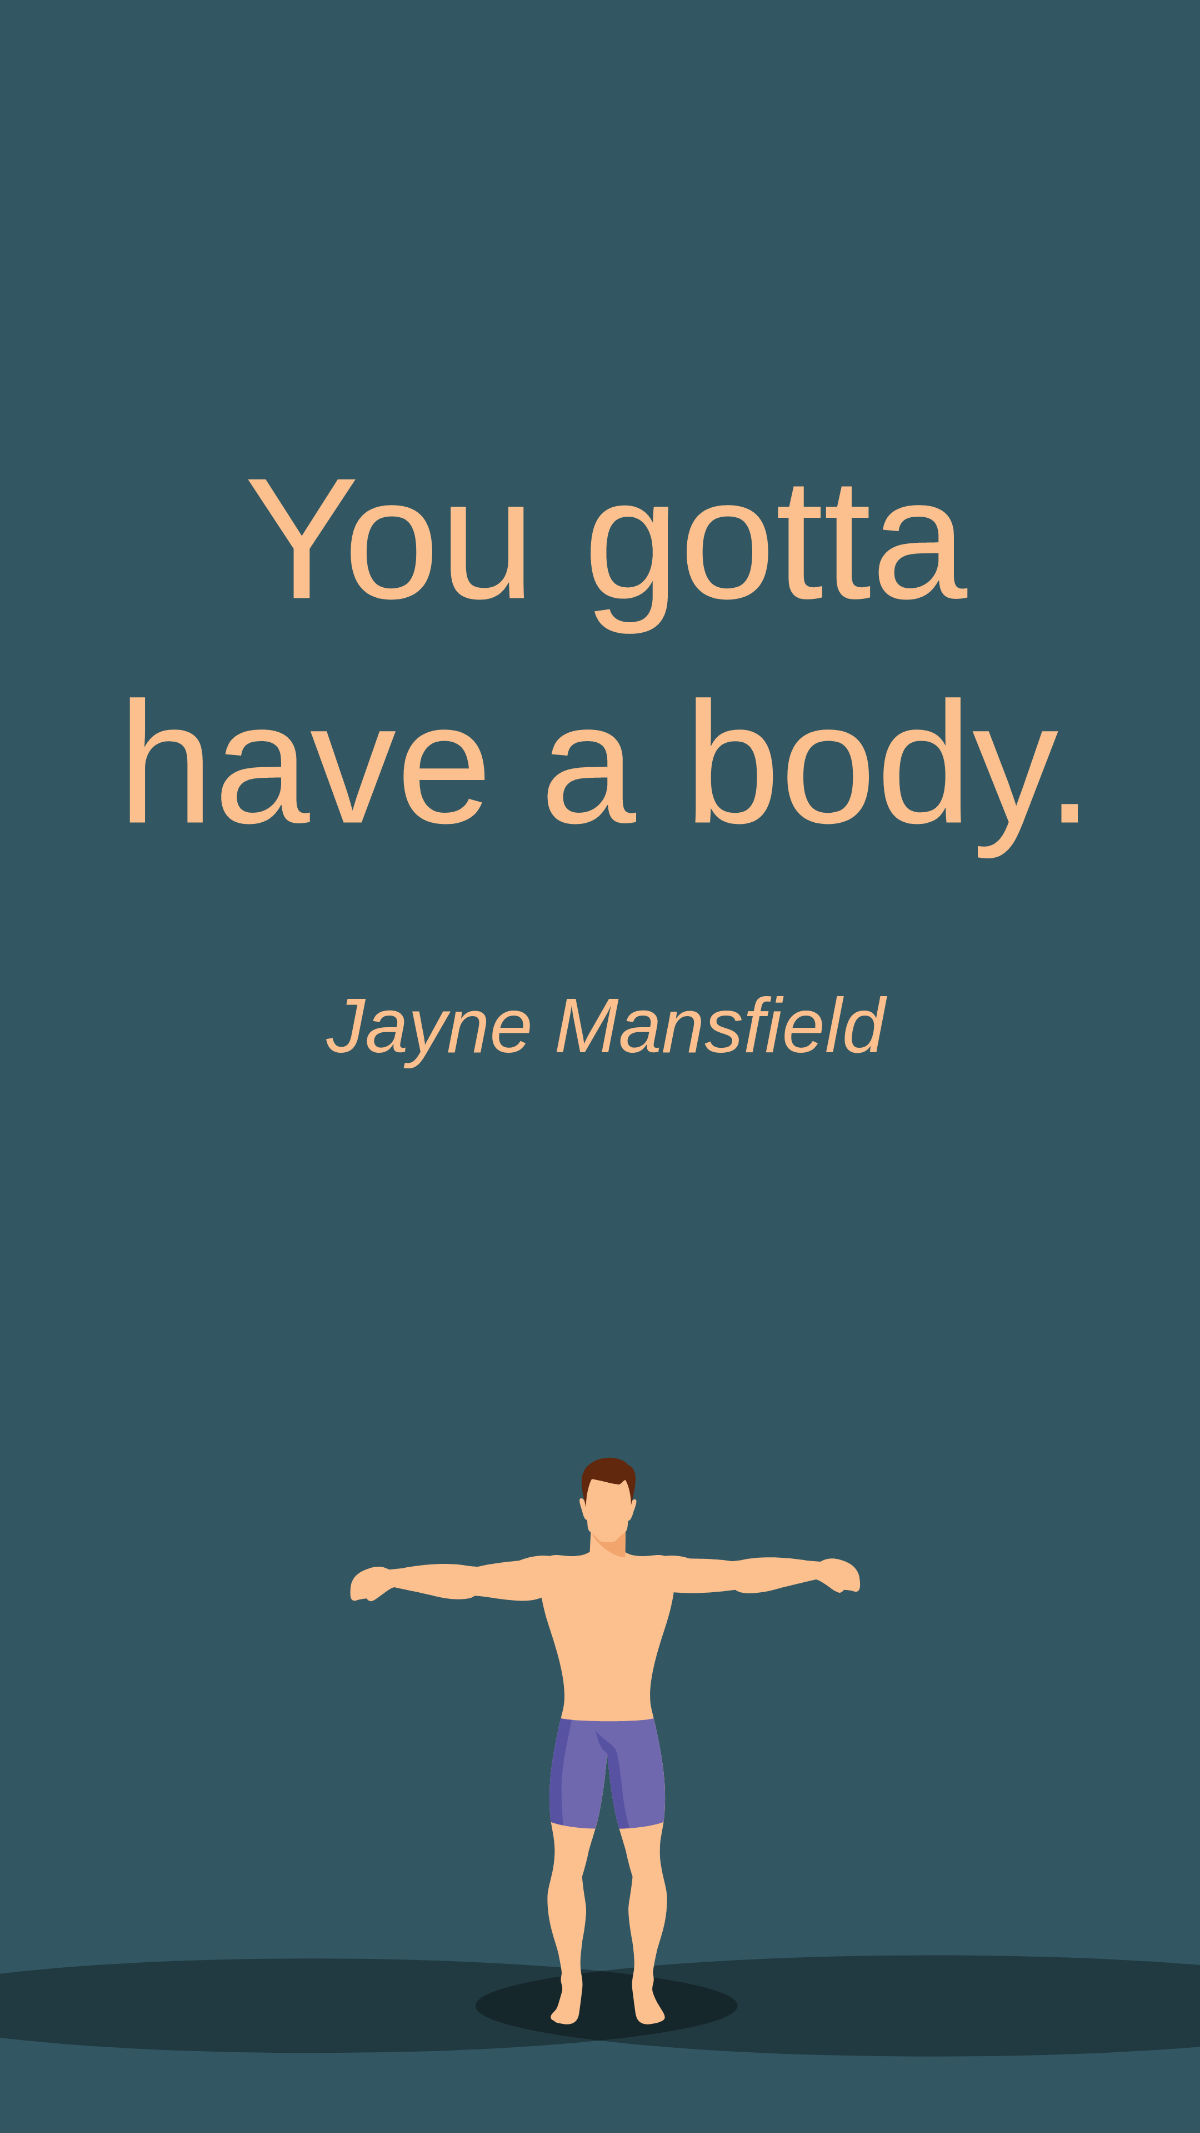 Free Jayne Mansfield - You gotta have a body. Template